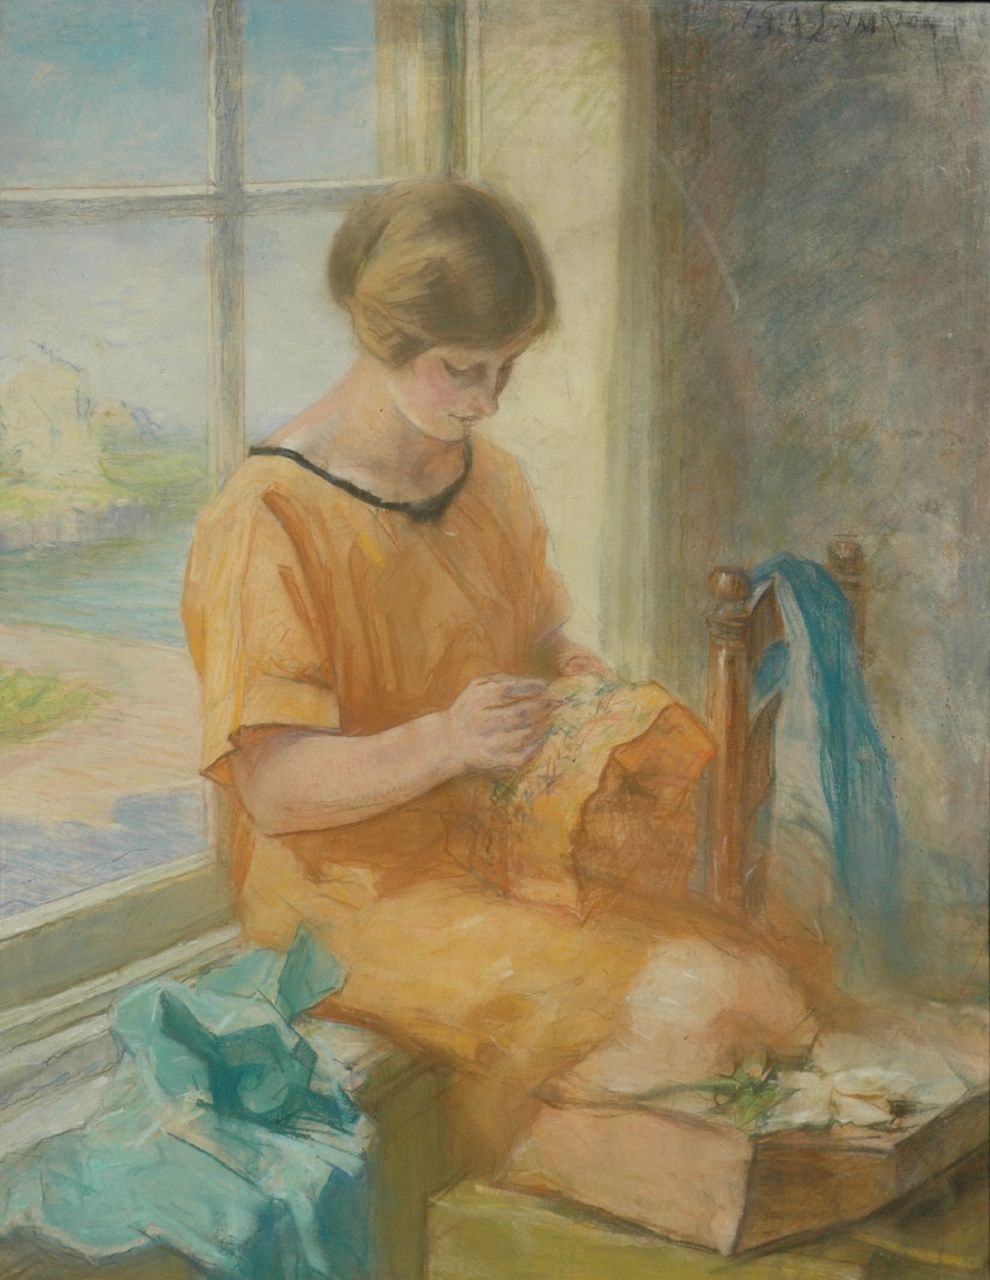 Vaarzon Morel W.F.A.I.  | Wilhelm Ferdinand Abraham Isaac 'Willem' Vaarzon Morel, The painter's wife embroiding, pastel on paper 66.0 x 51.0 cm, signed u.r.